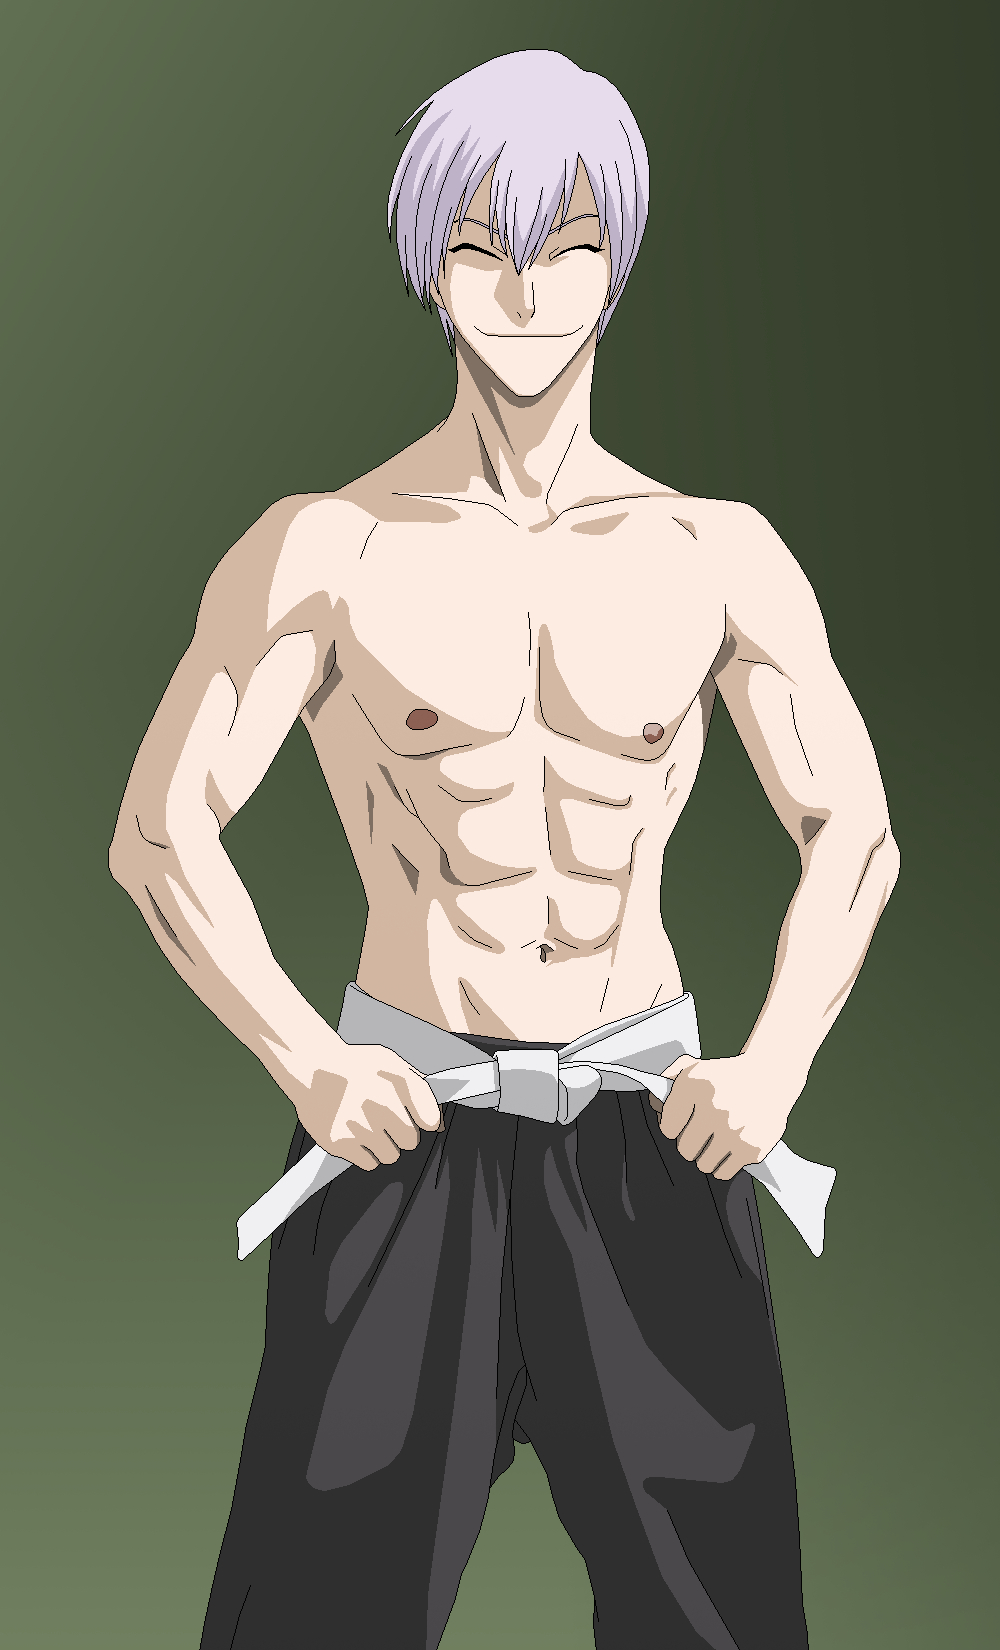 Sexyanimes on X: #BLEACH #BLEACH_anime #muscle #muscles #hot #anime #guy  #guys #shirtless #traditional #posing  / X